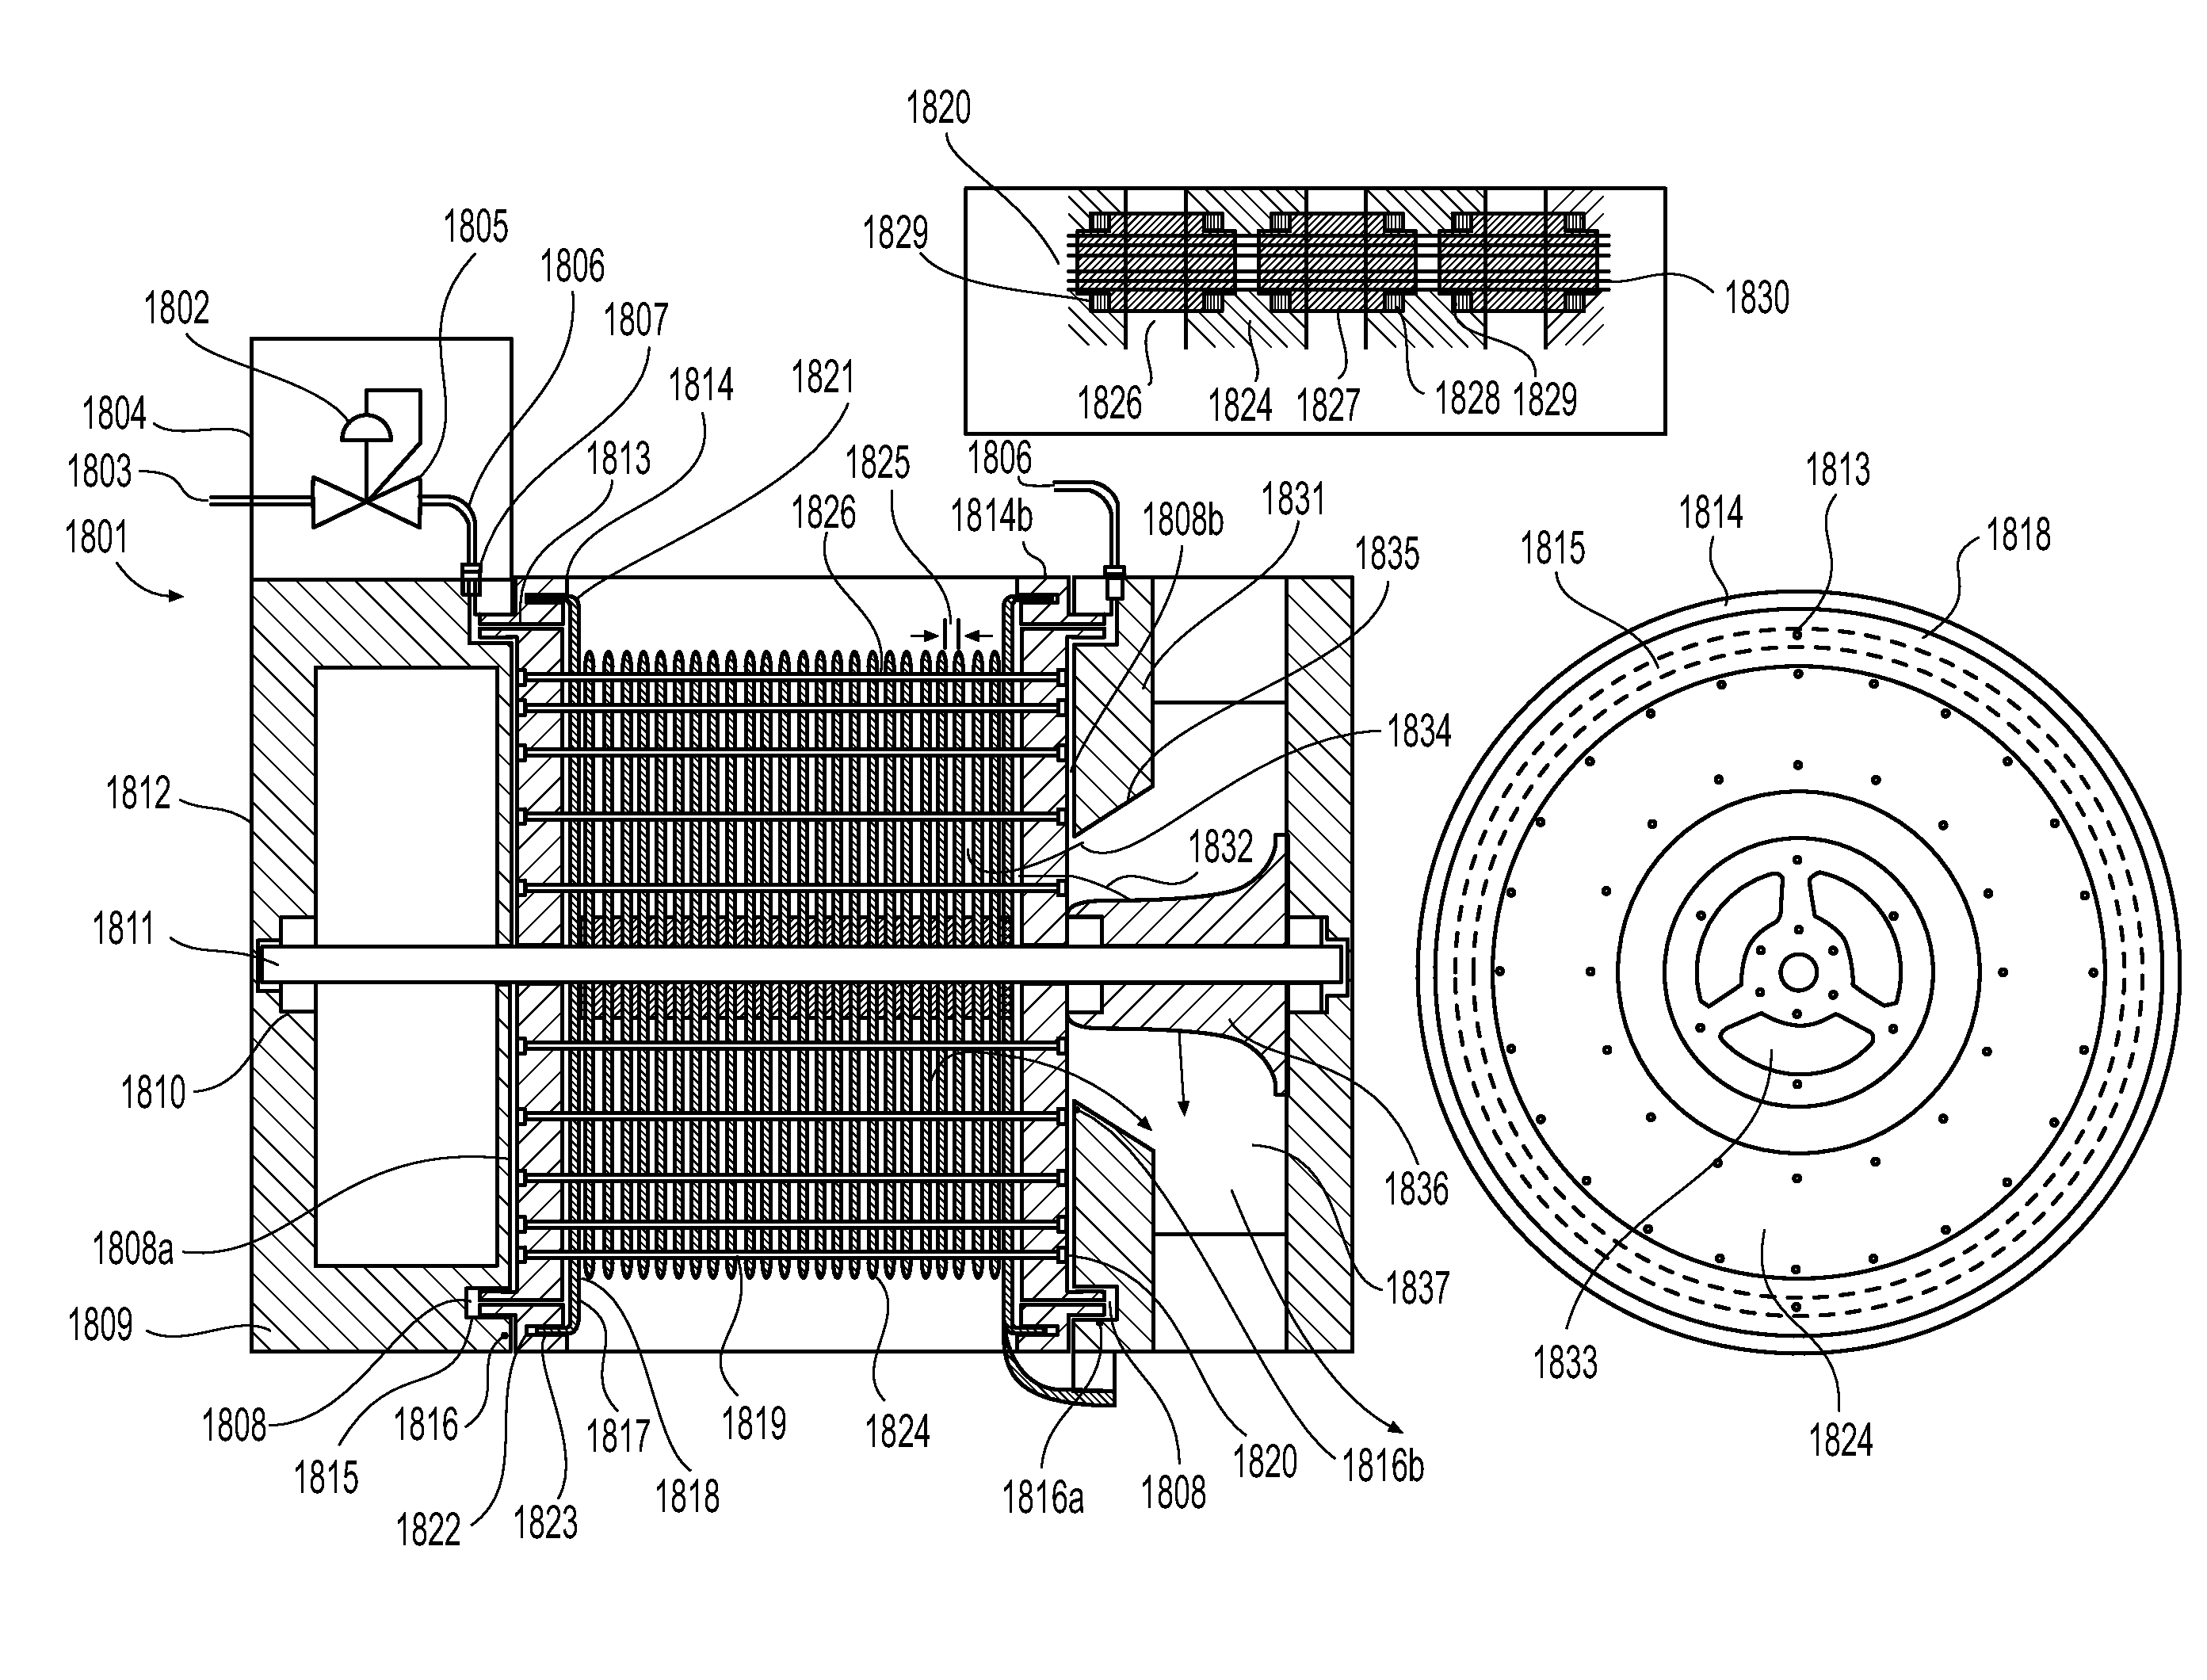 System and method for extracting power from fluid using a Tesla-type bladeless turbine